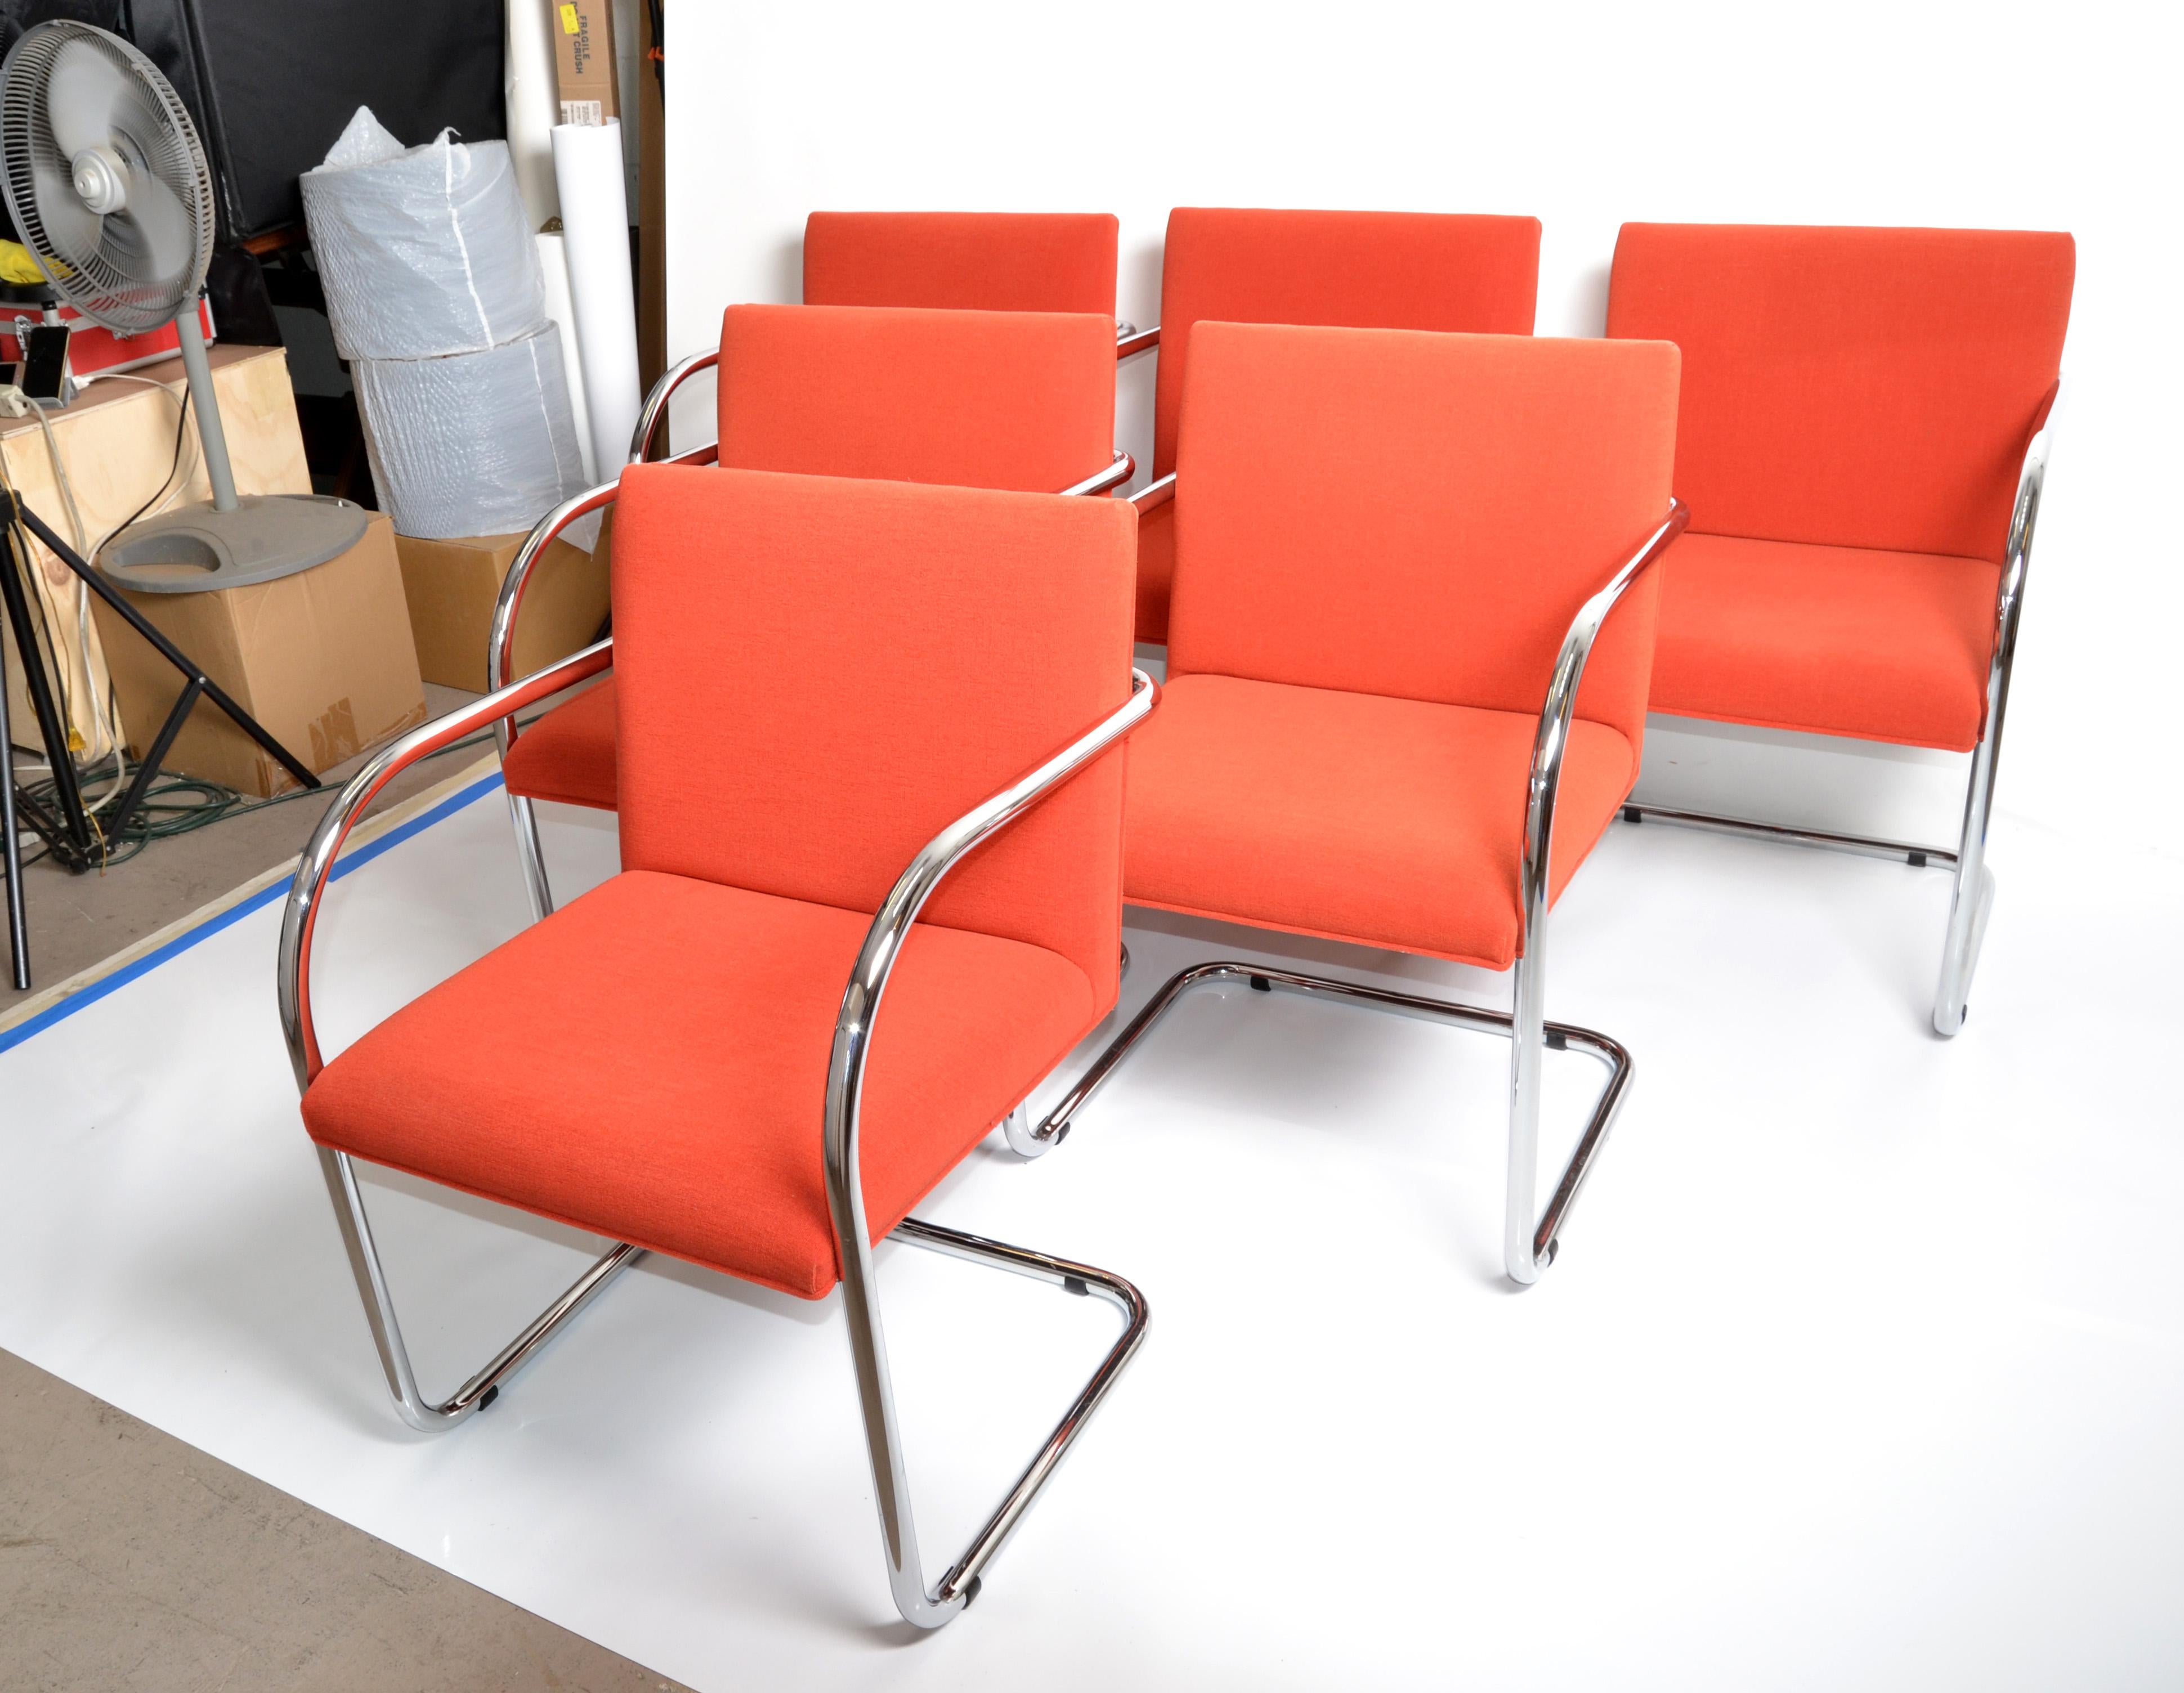 Set of Ludwig Mies van der Rohe attributed Brno armchairs or dining room chairs in original coral red fabric upholstery. 
Solid chrome tubular frames with cantilever swing, very comfortable.
Marked with original paper tag under the seat, Gordon